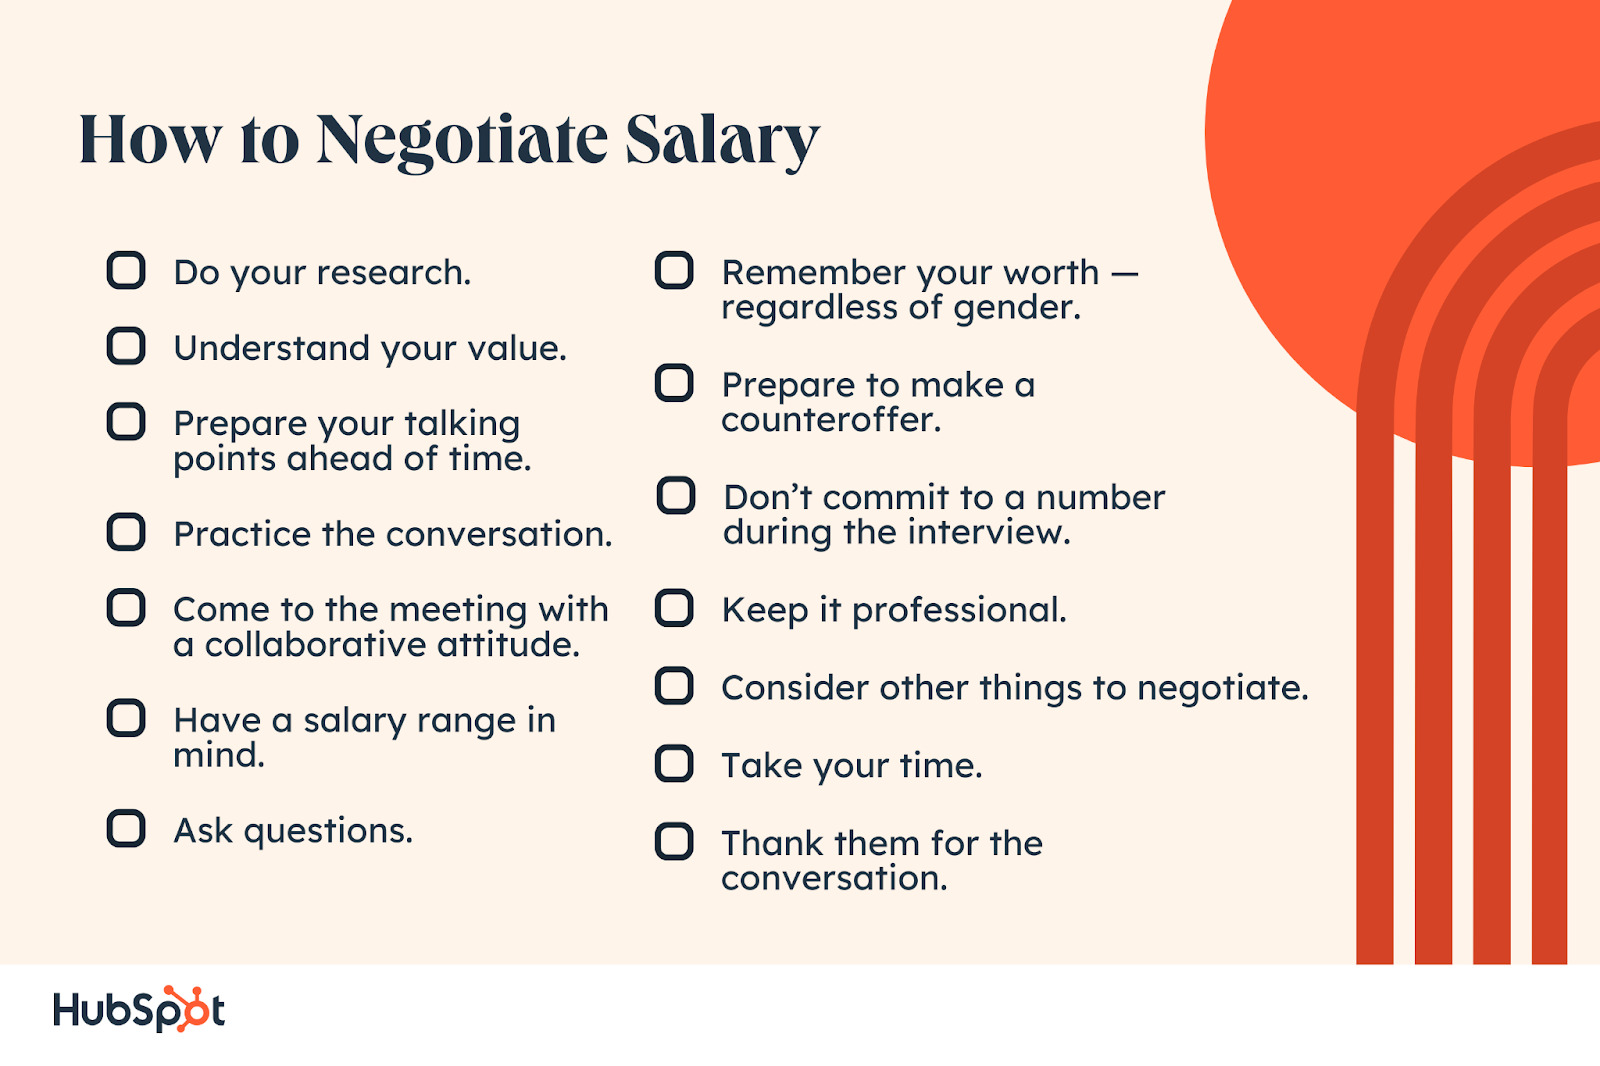 How to Negotiate Salary. Do your research. Understand your value. Prepare your talking points ahead of time. Practice the conversation. Come to the meeting with a collaborative attitude. Remember your worth — regardless of gender. Prepare to make a counteroffer. Don’t commit to a number during the interview. Have a salary range in mind. Ask questions. Keep it professional. Consider other things to negotiate. Take your time. Thank them for the conversation.